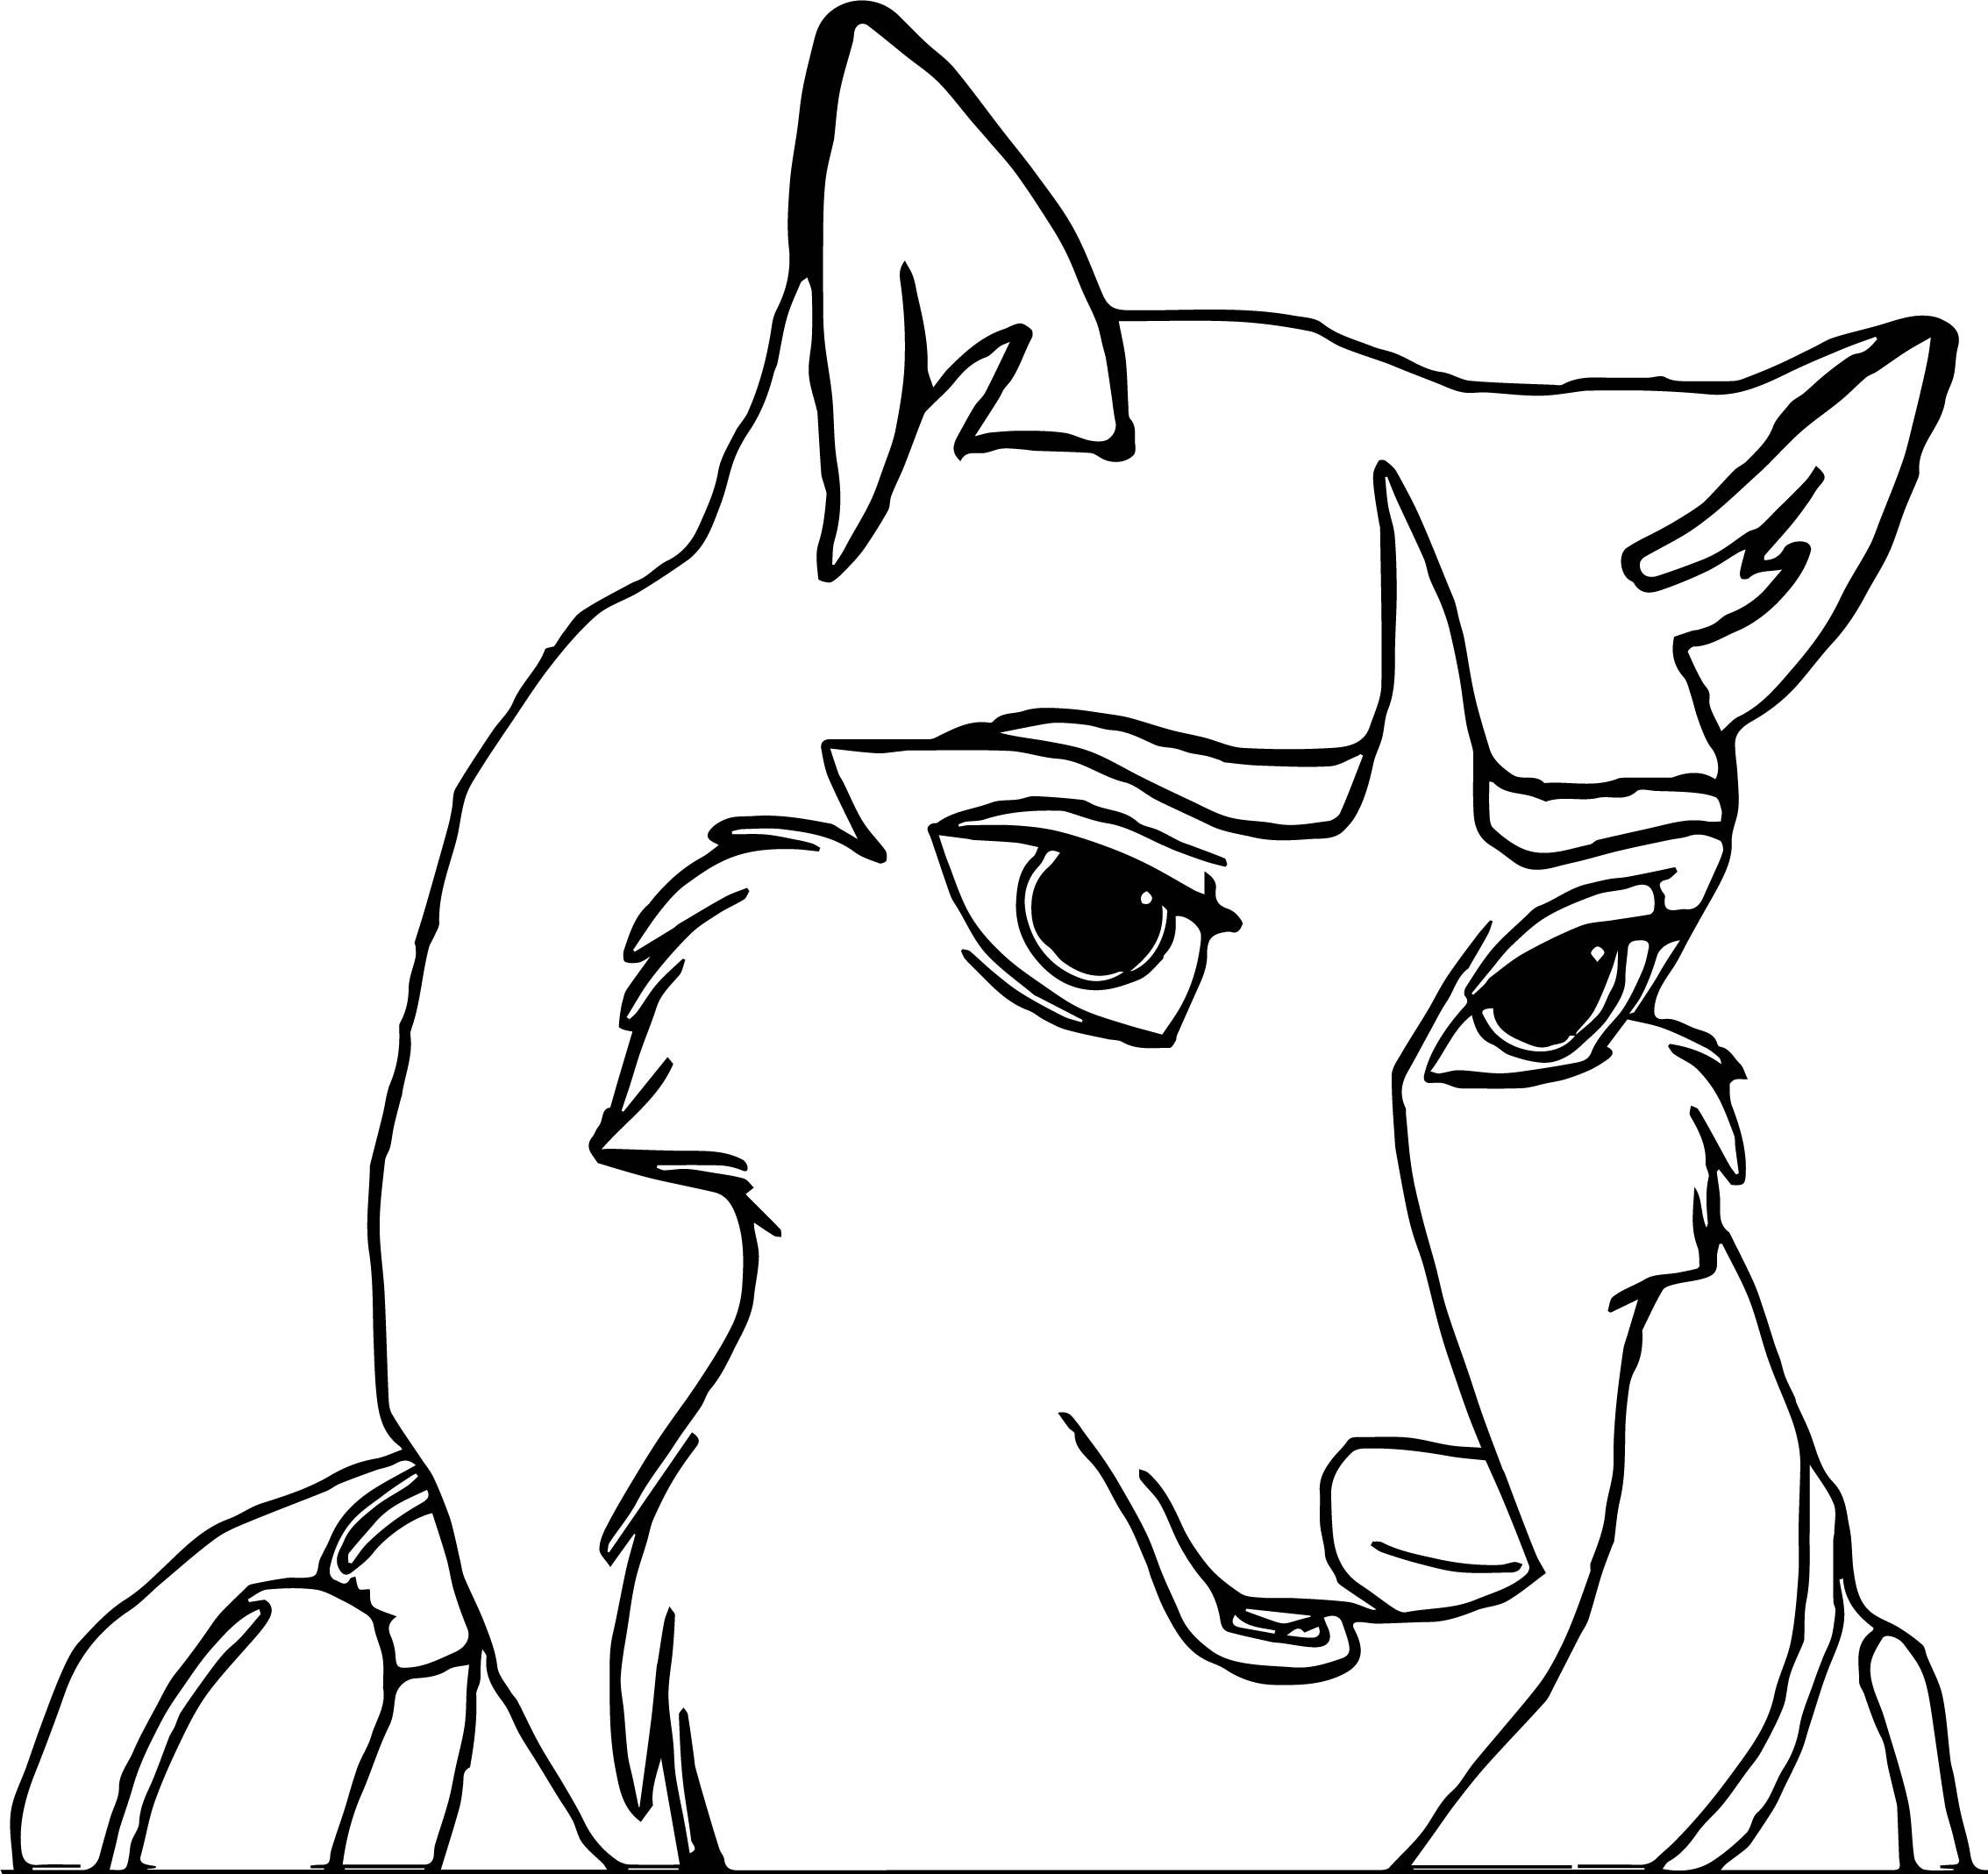 Jenna Balto Coloring Pages - pietercabe